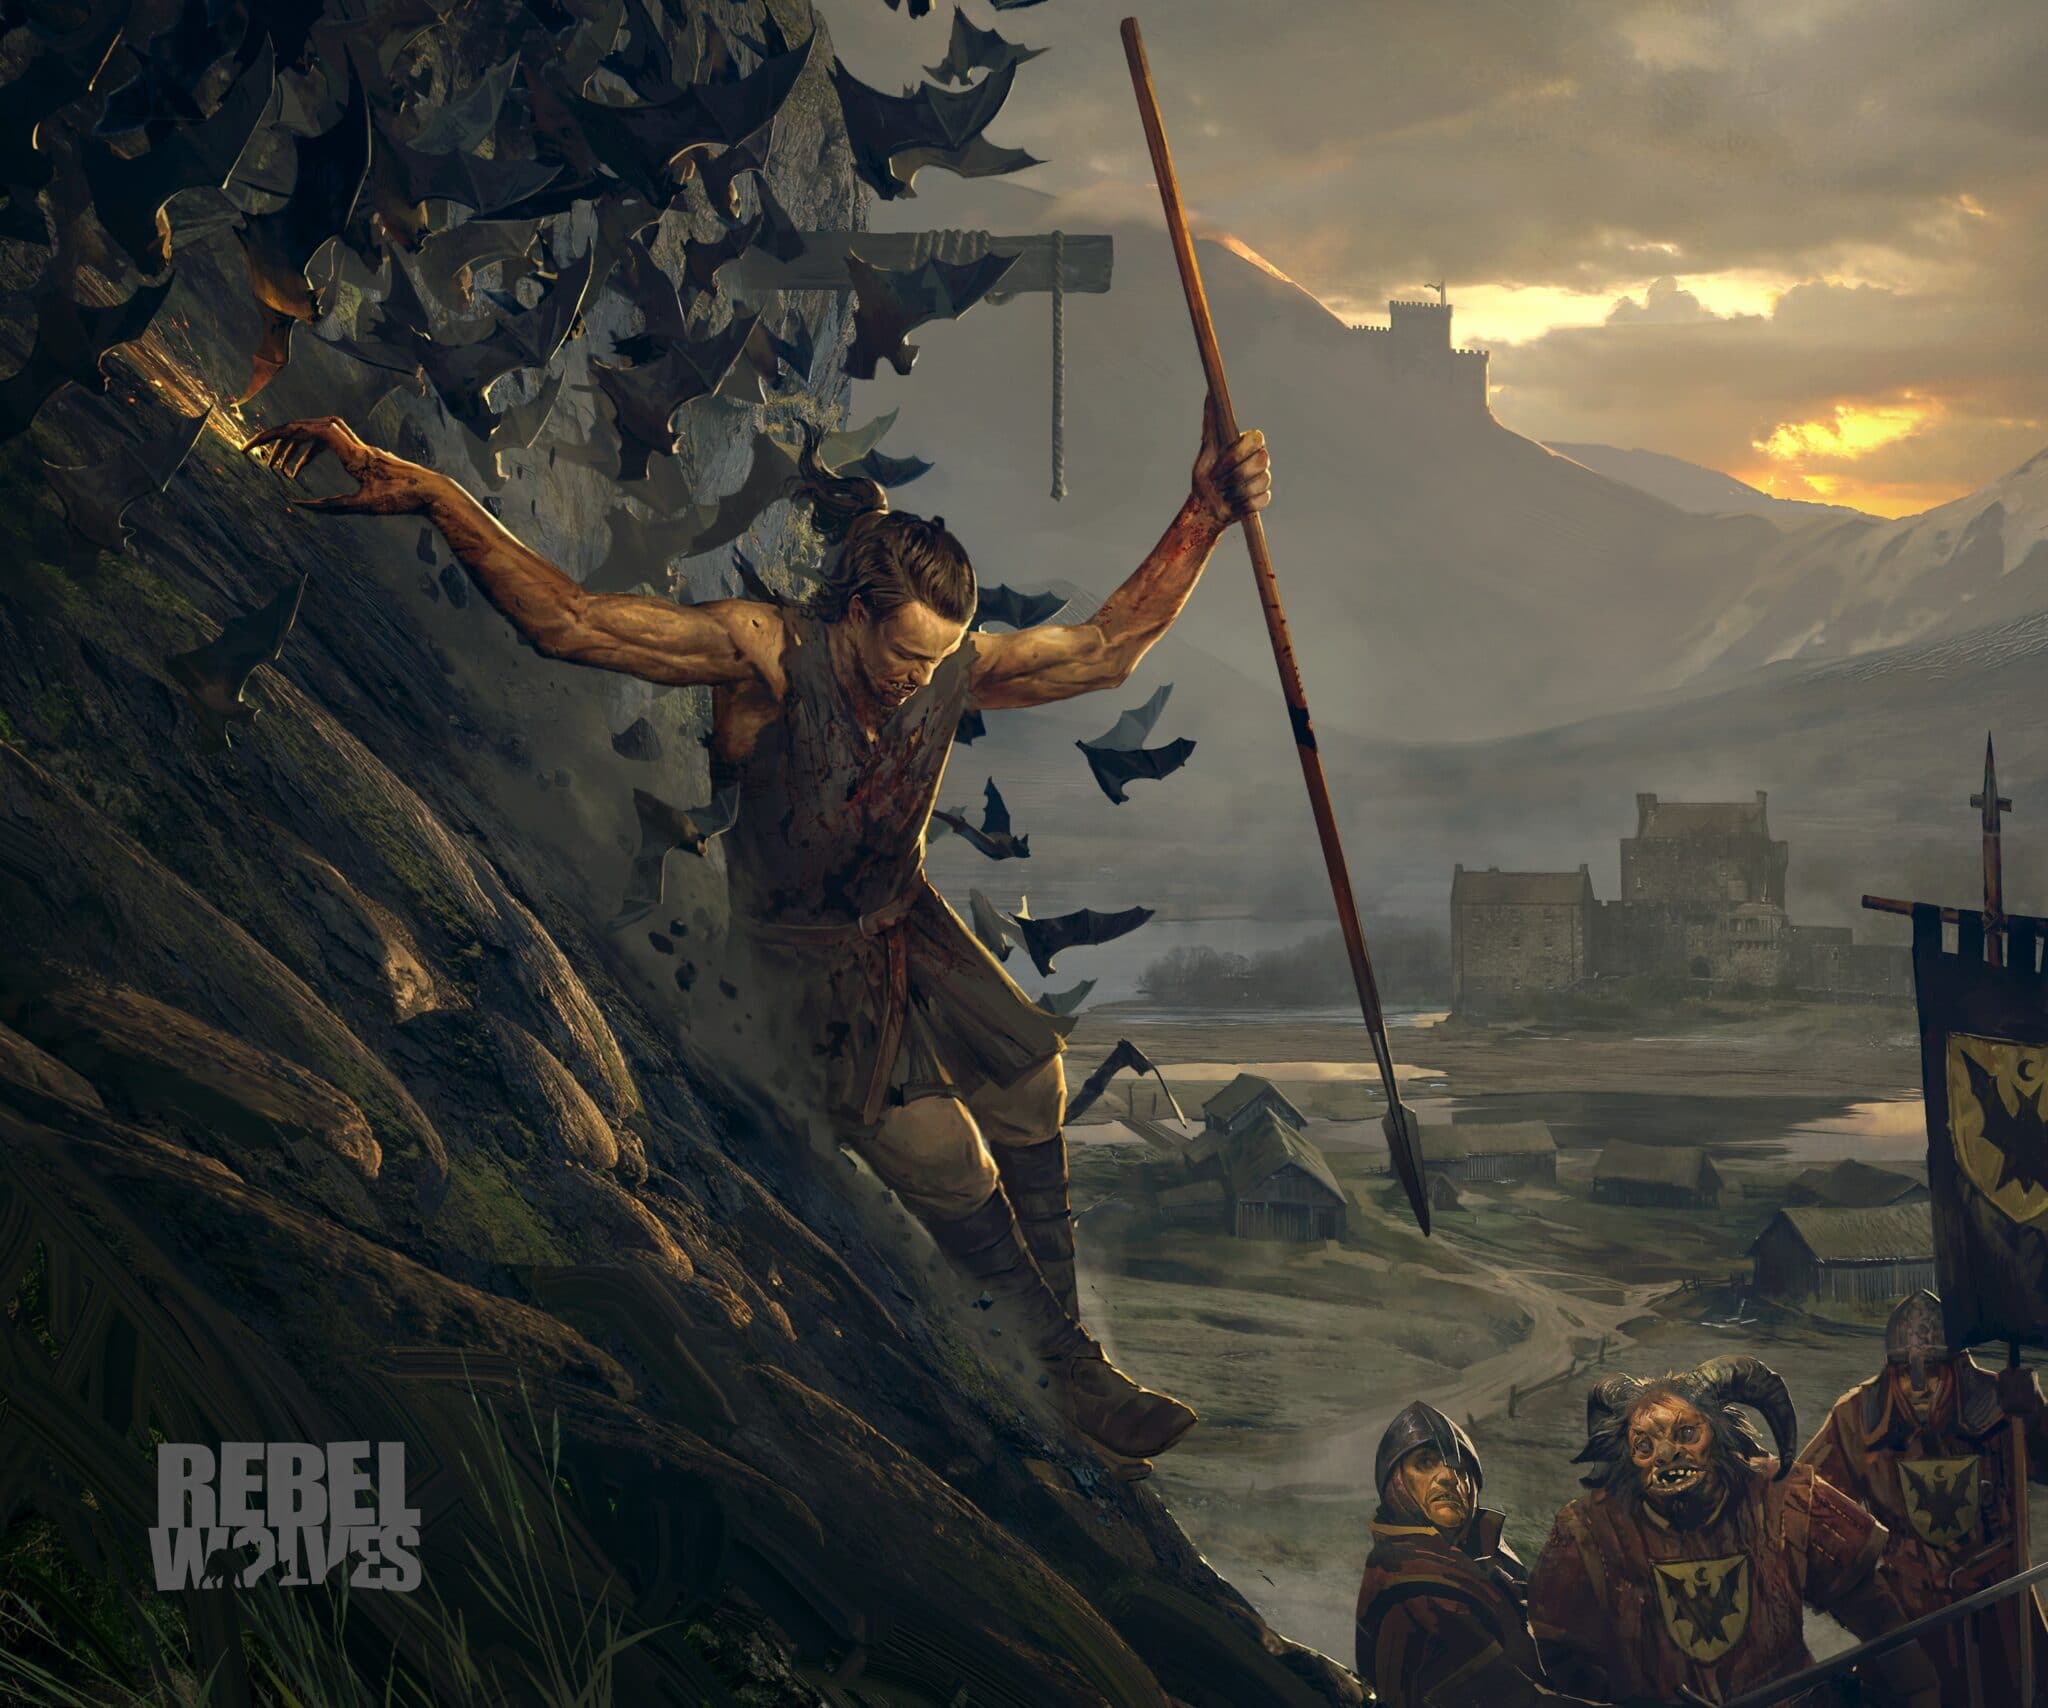 So far, all we can see is this concept art for the new game. It hints at a dark fantasy setting and war.